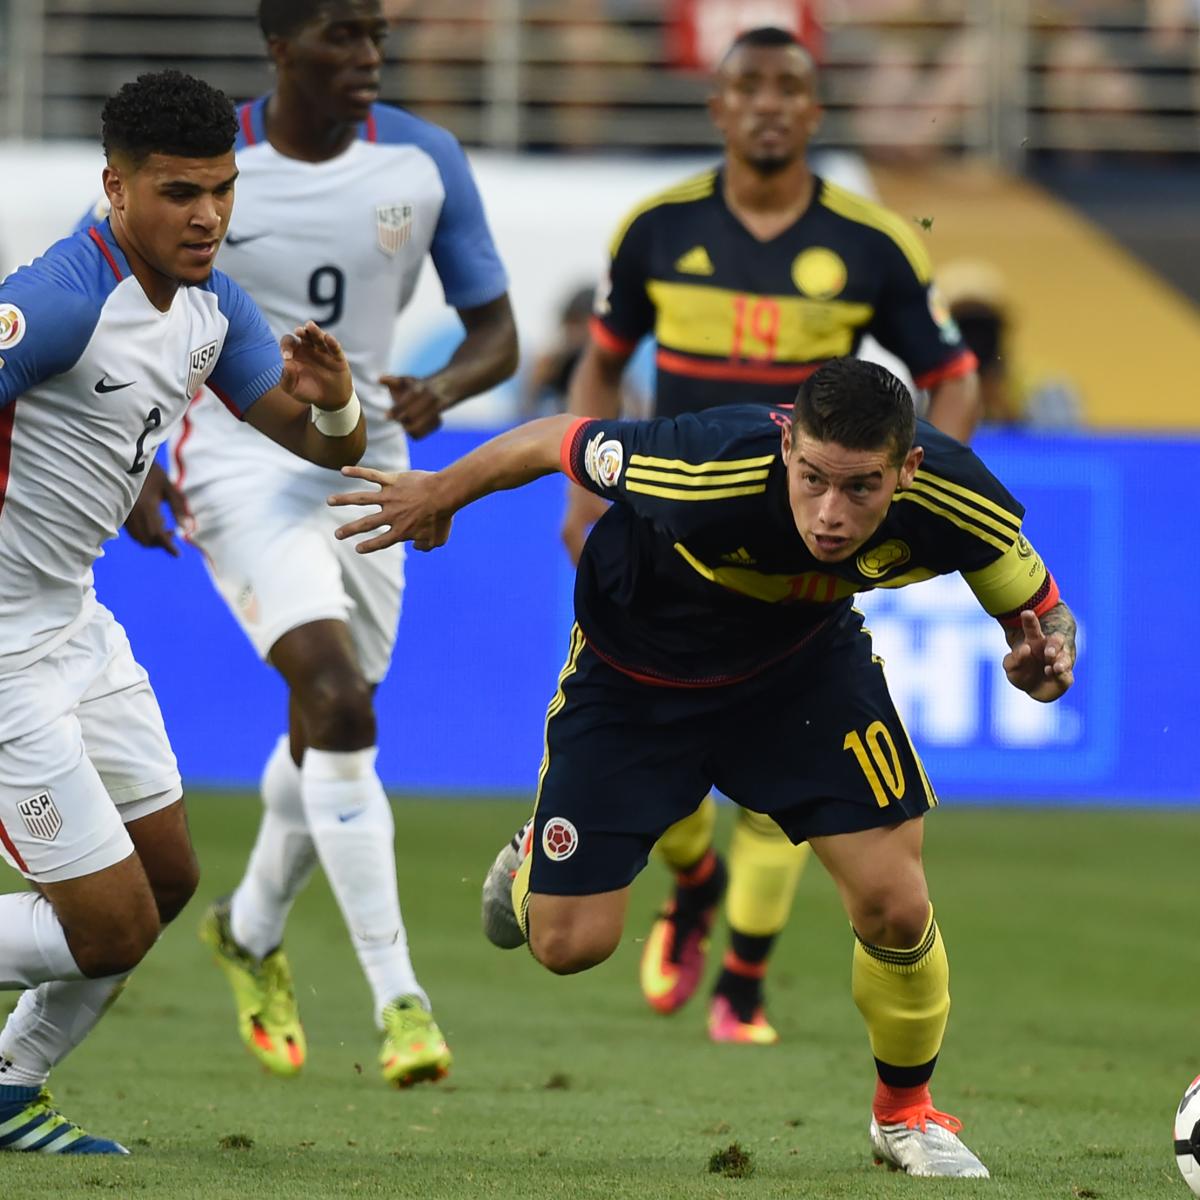 USA vs. Colombia Live Score, Highlights from Copa America 3rdPlace